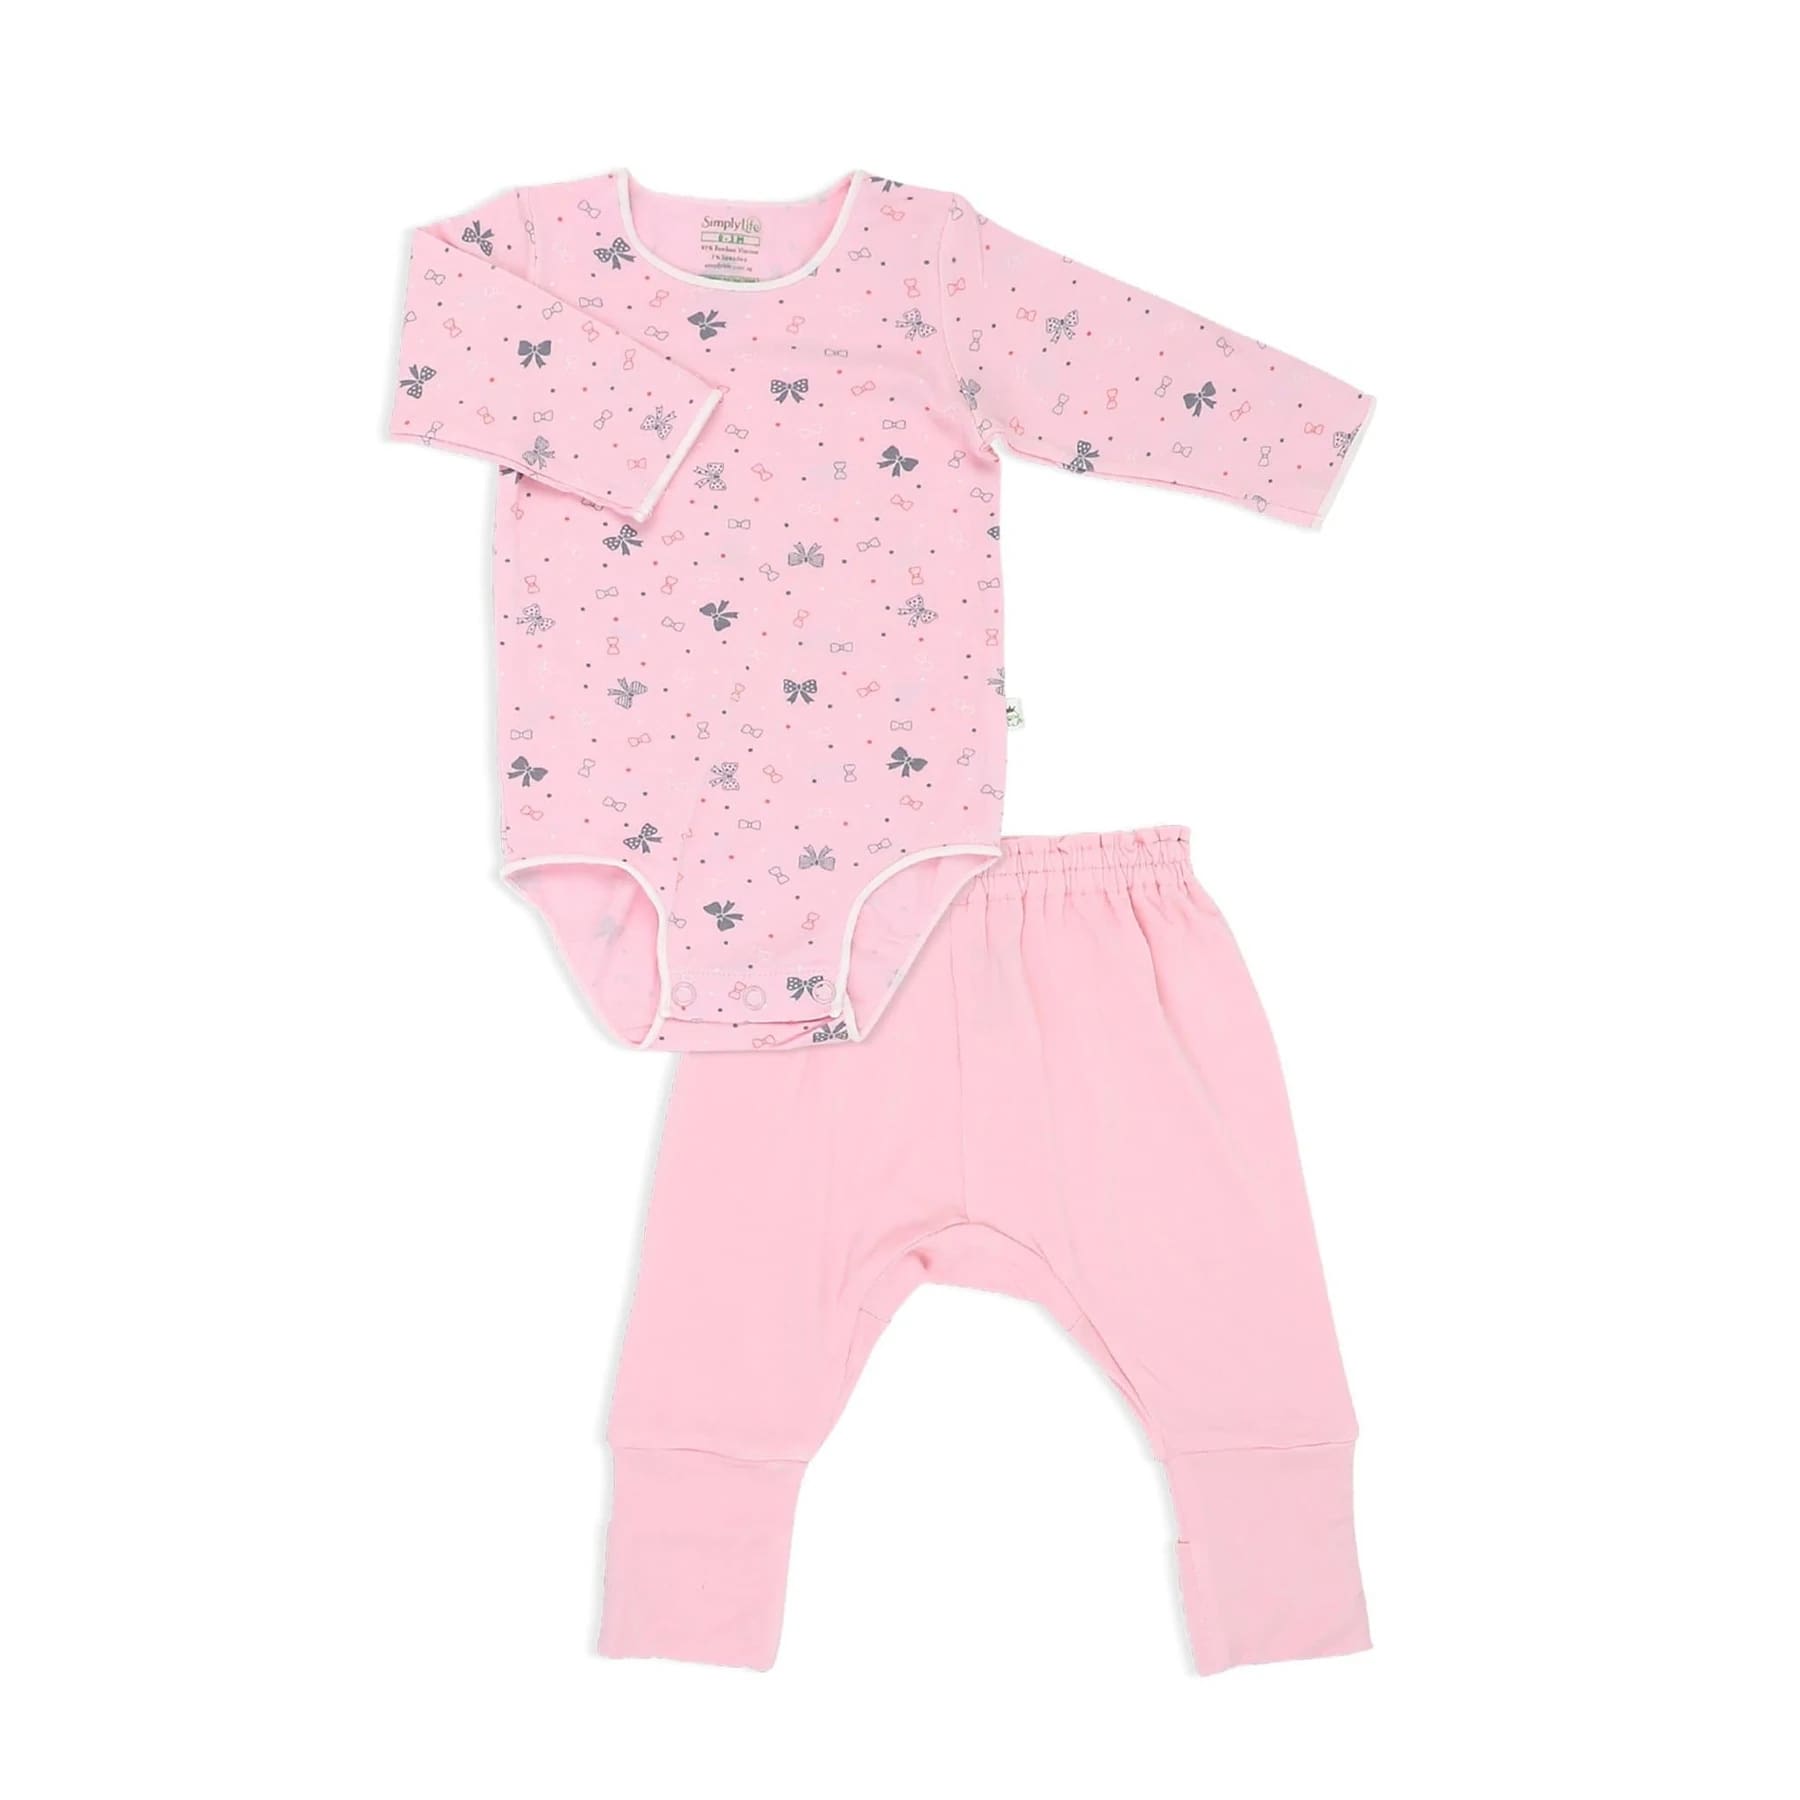 Simply Life Ribbons - Long-Sleeved Stretchy Romper With Foldable Footie Pants